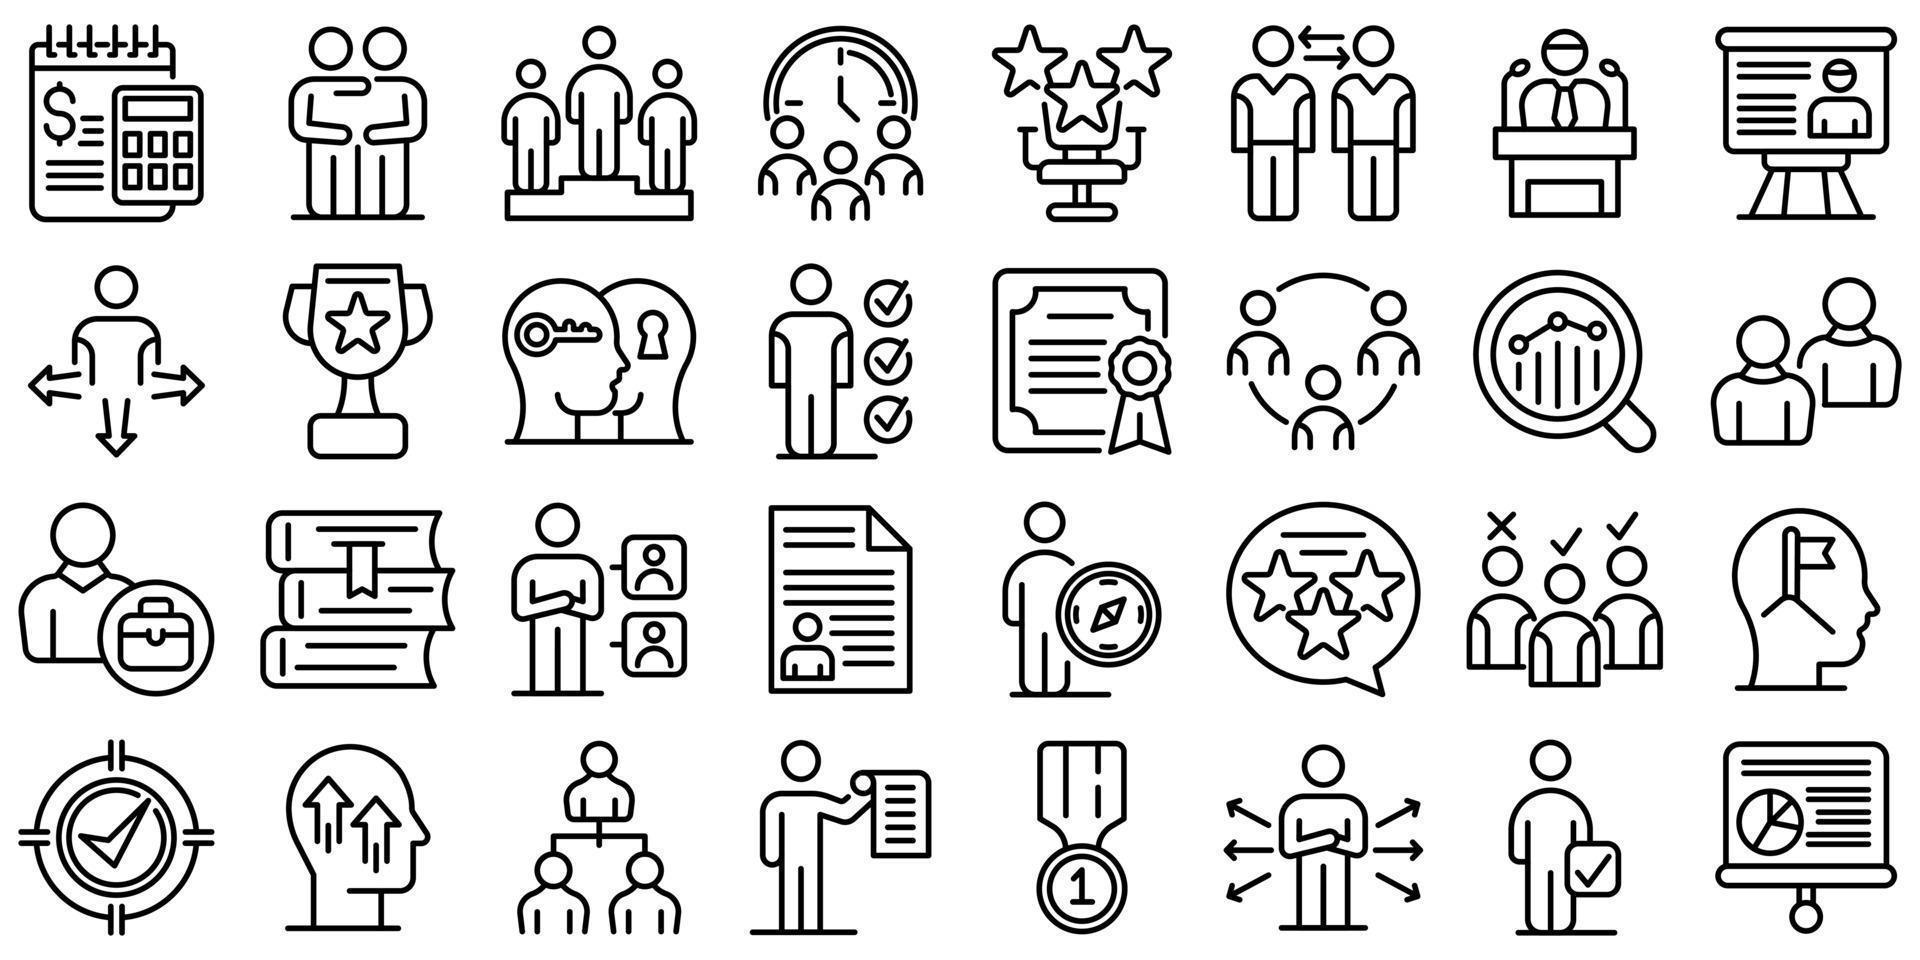 Mentor icons set, outline style vector